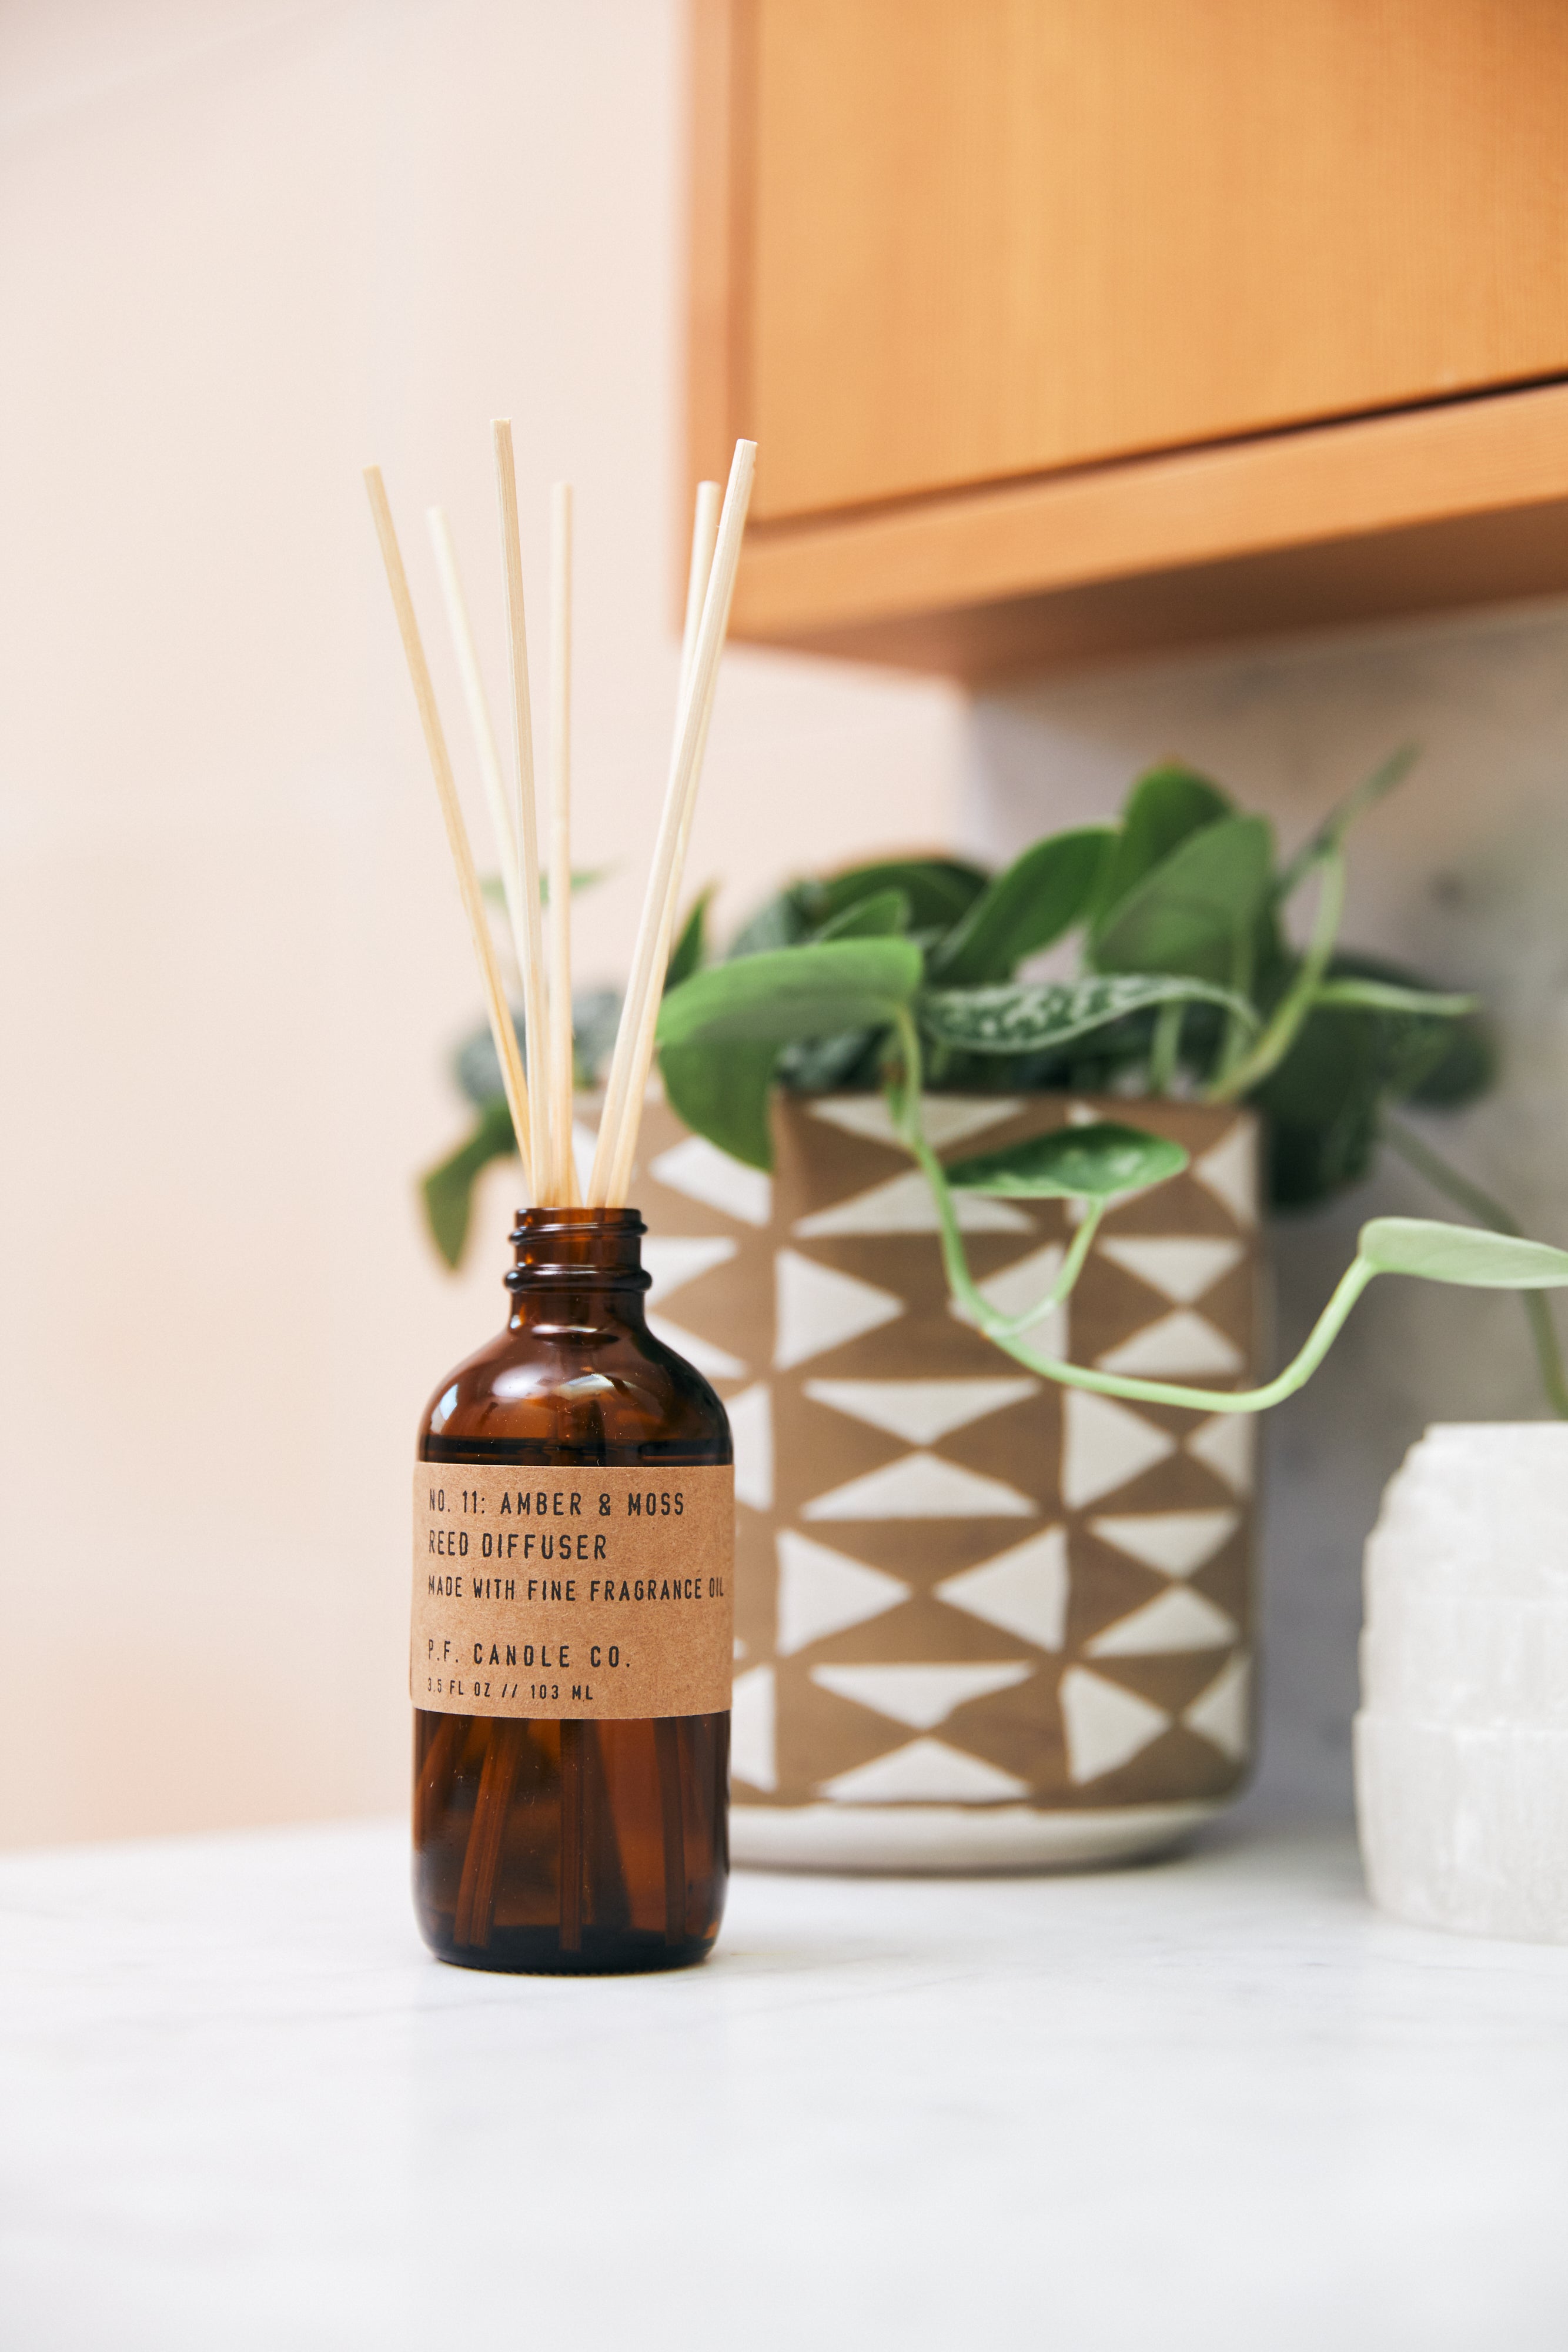 P.F.Candle Co. Reed Diffuser #11 AMBER&MOSS